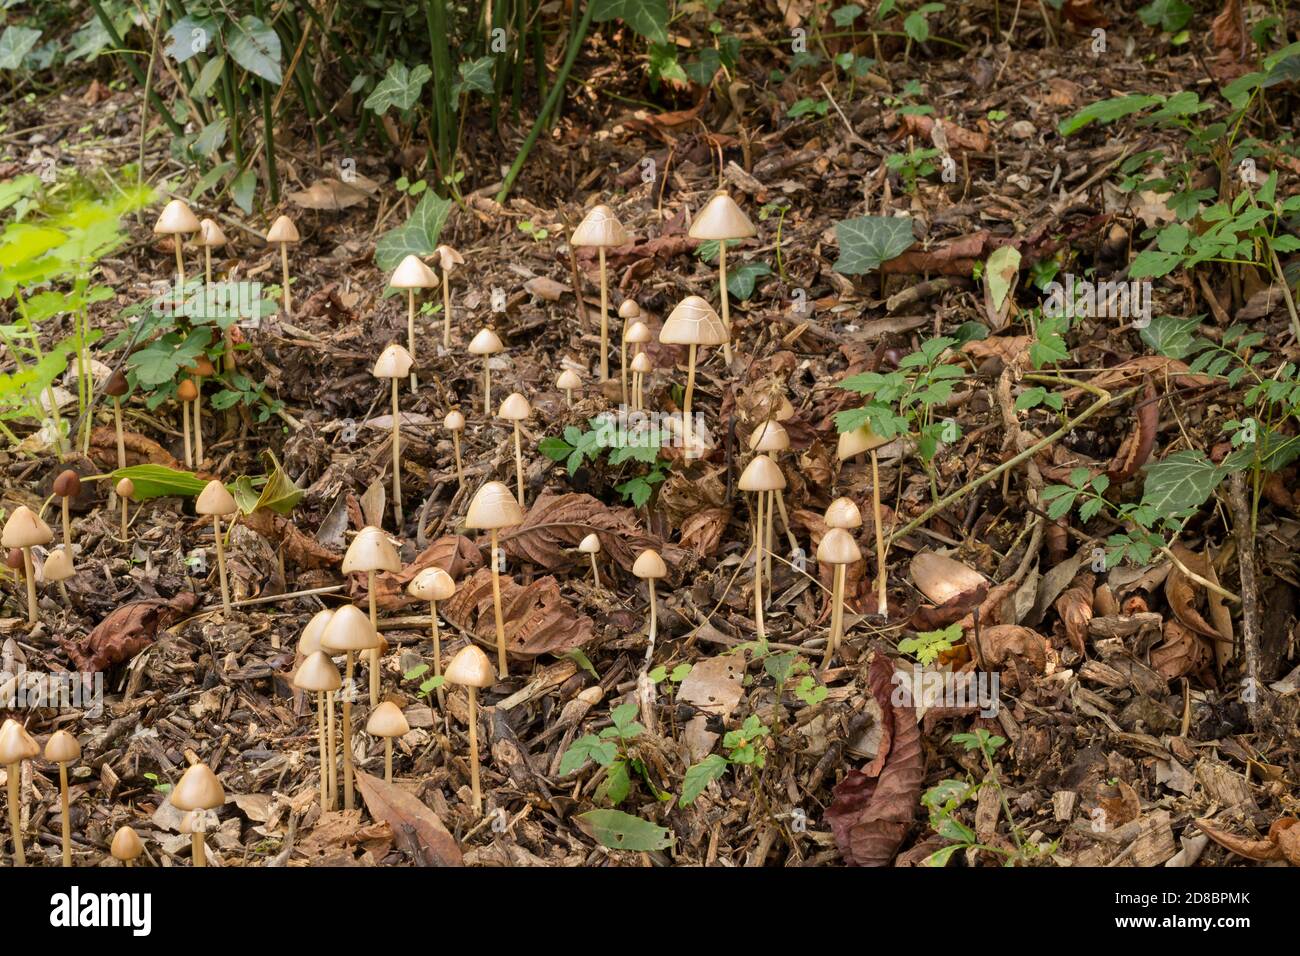 A group of the possibly, Bolbitius group of mushrooms of which there are around 54 known valid species. Stock Photo